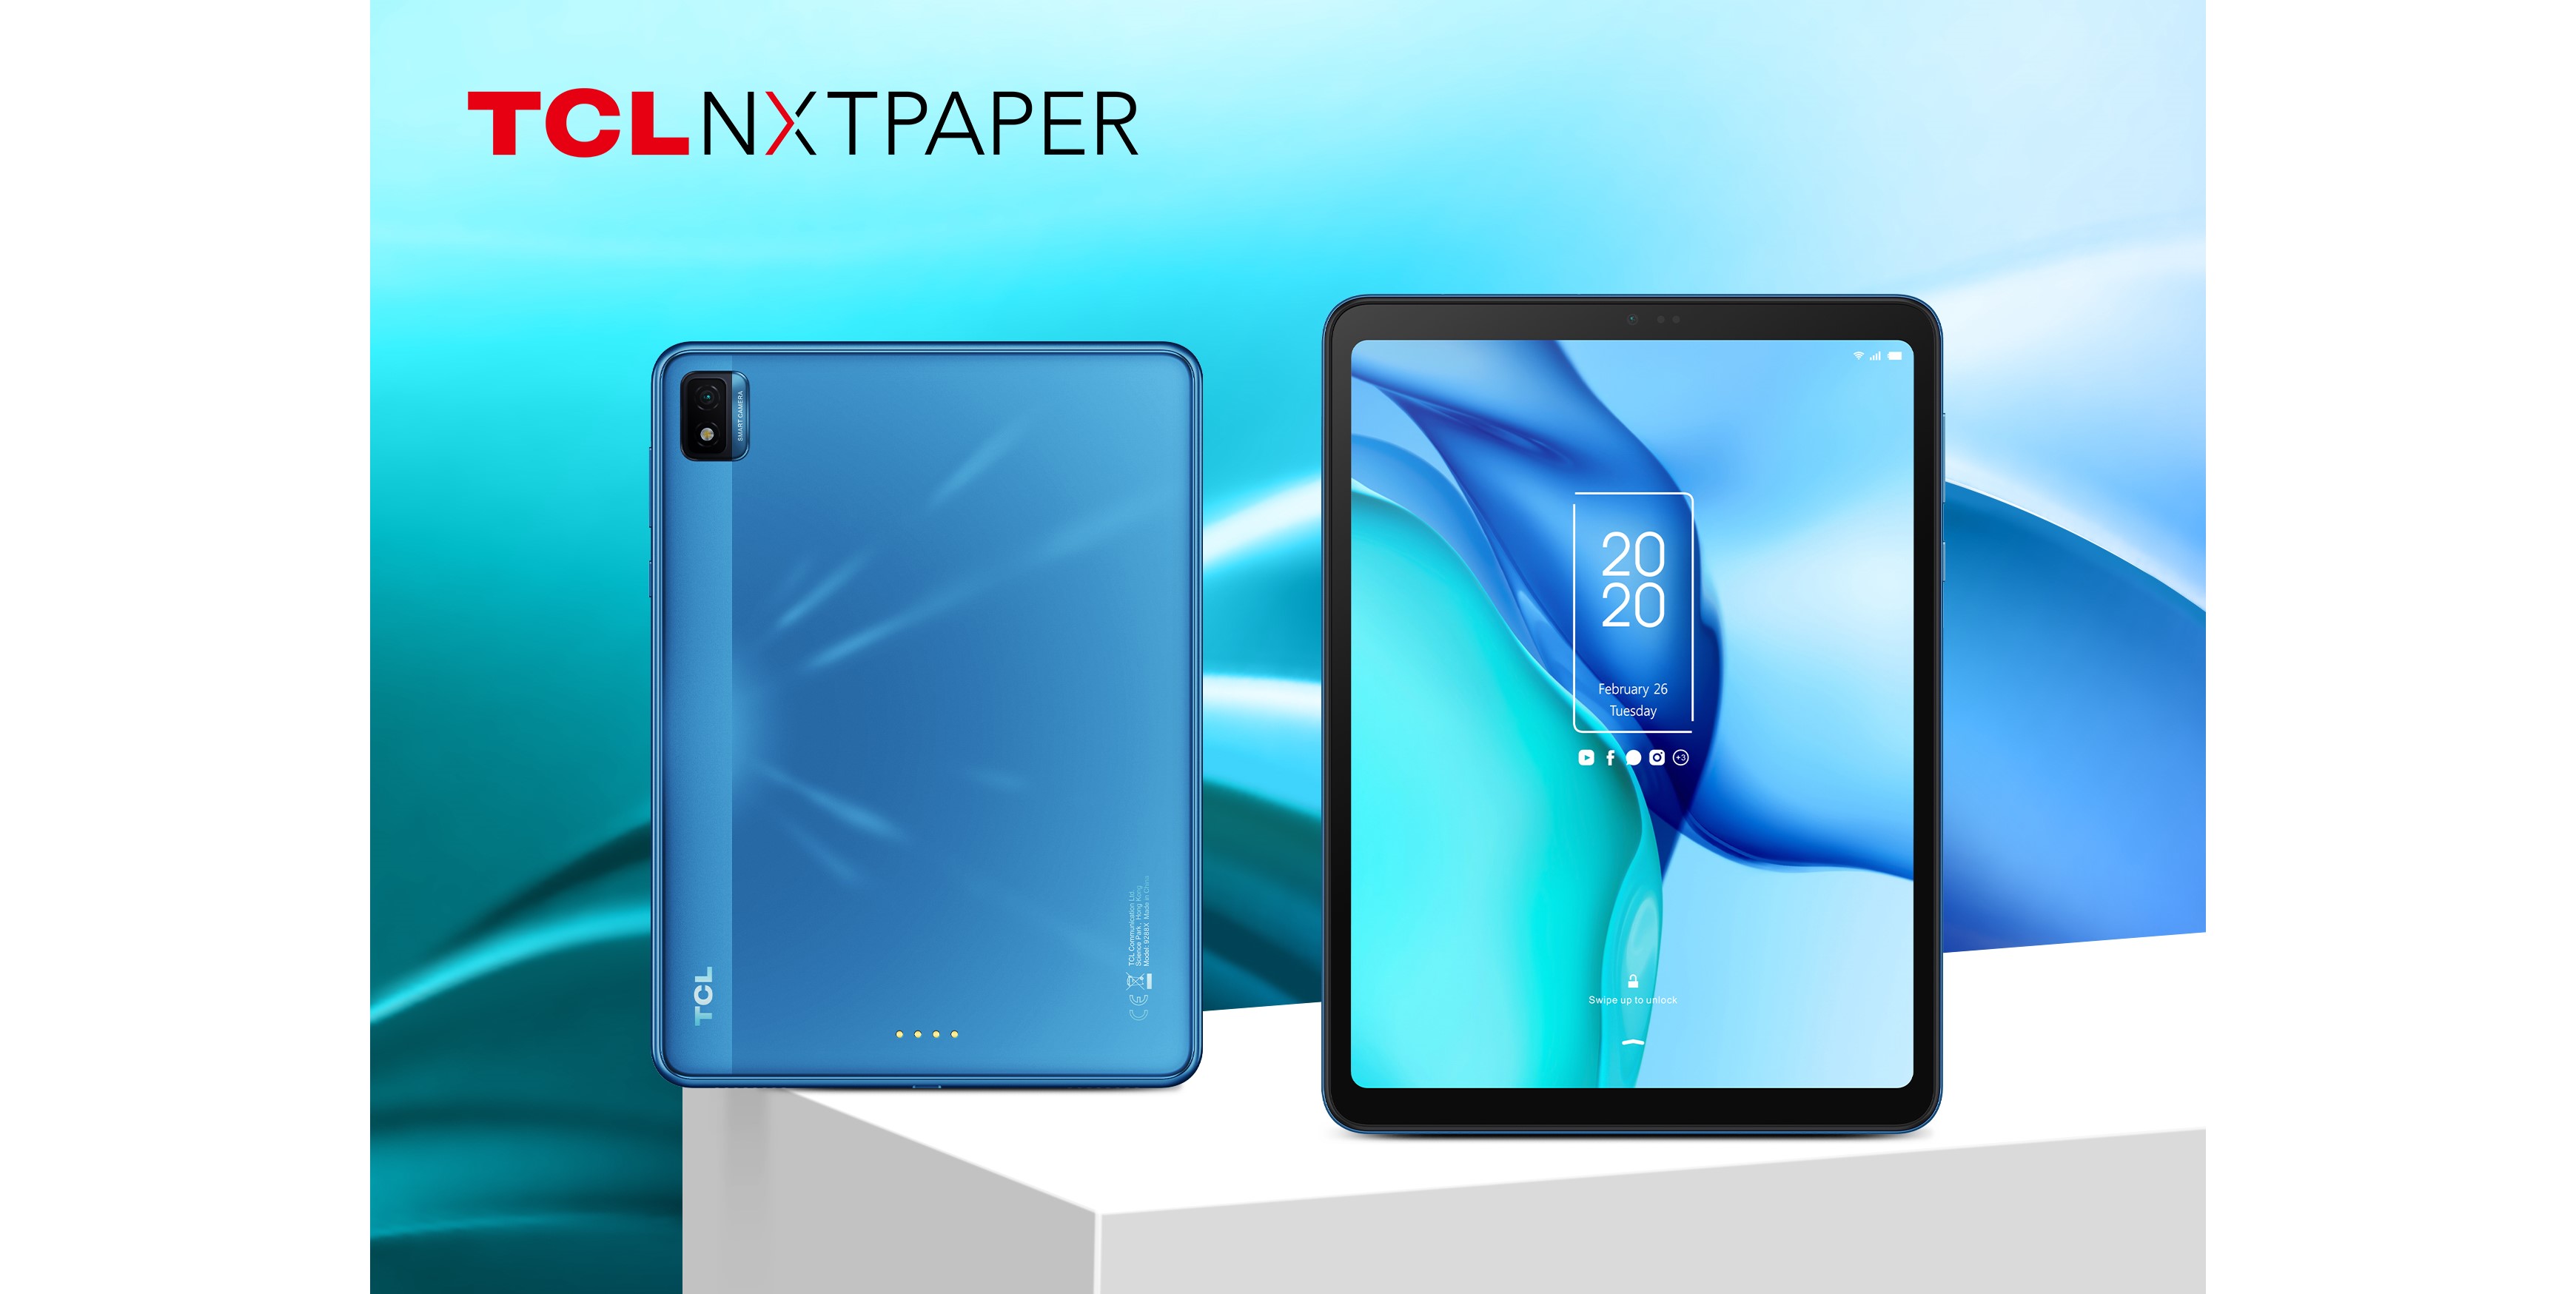 TCL 50 XL NXTPAPER 5G launches as flagship for broad range of new  smartphones -  News